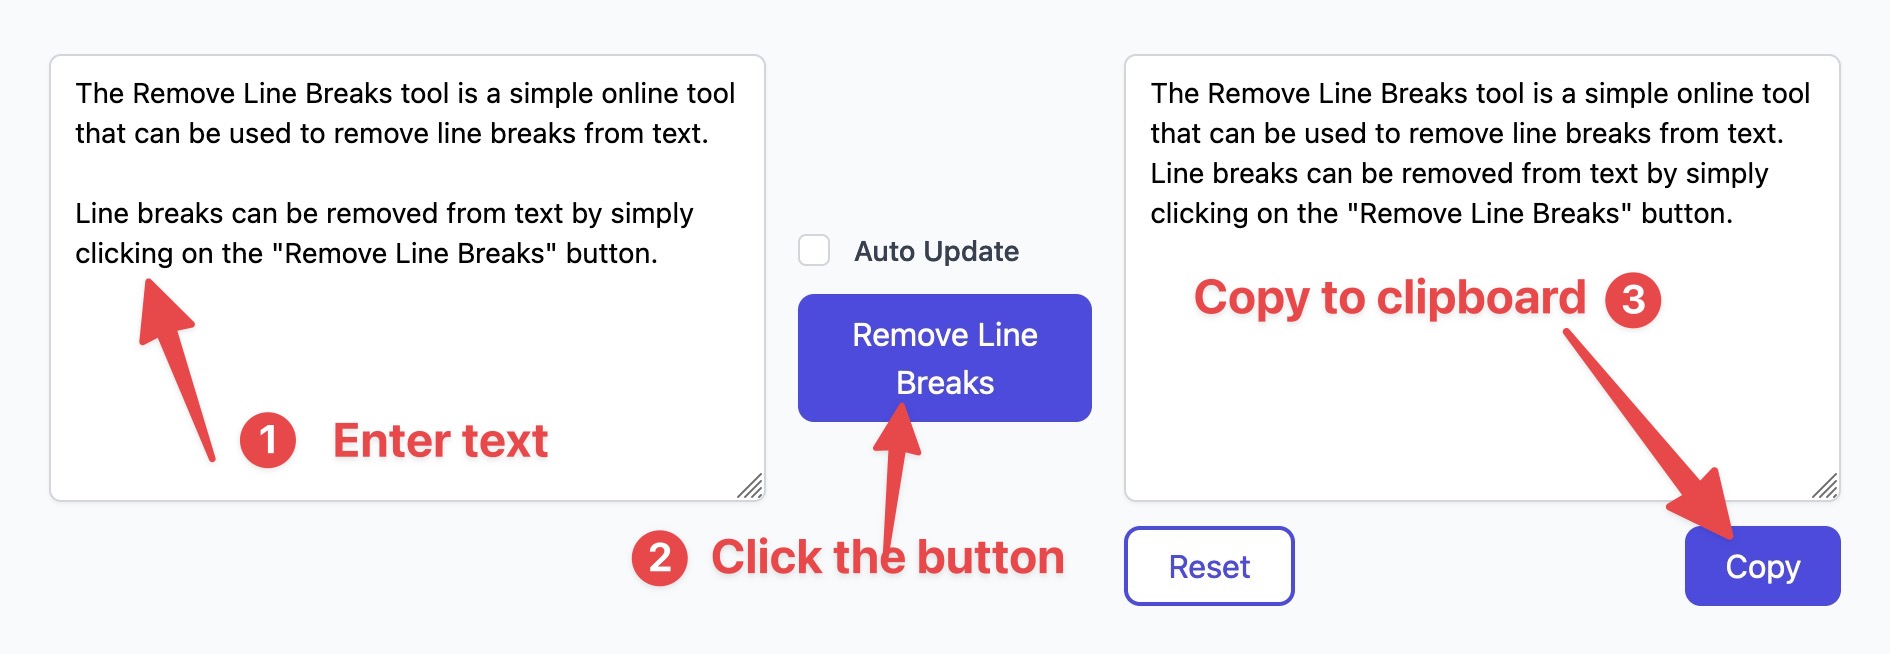 How to use Remove Line breaks tool